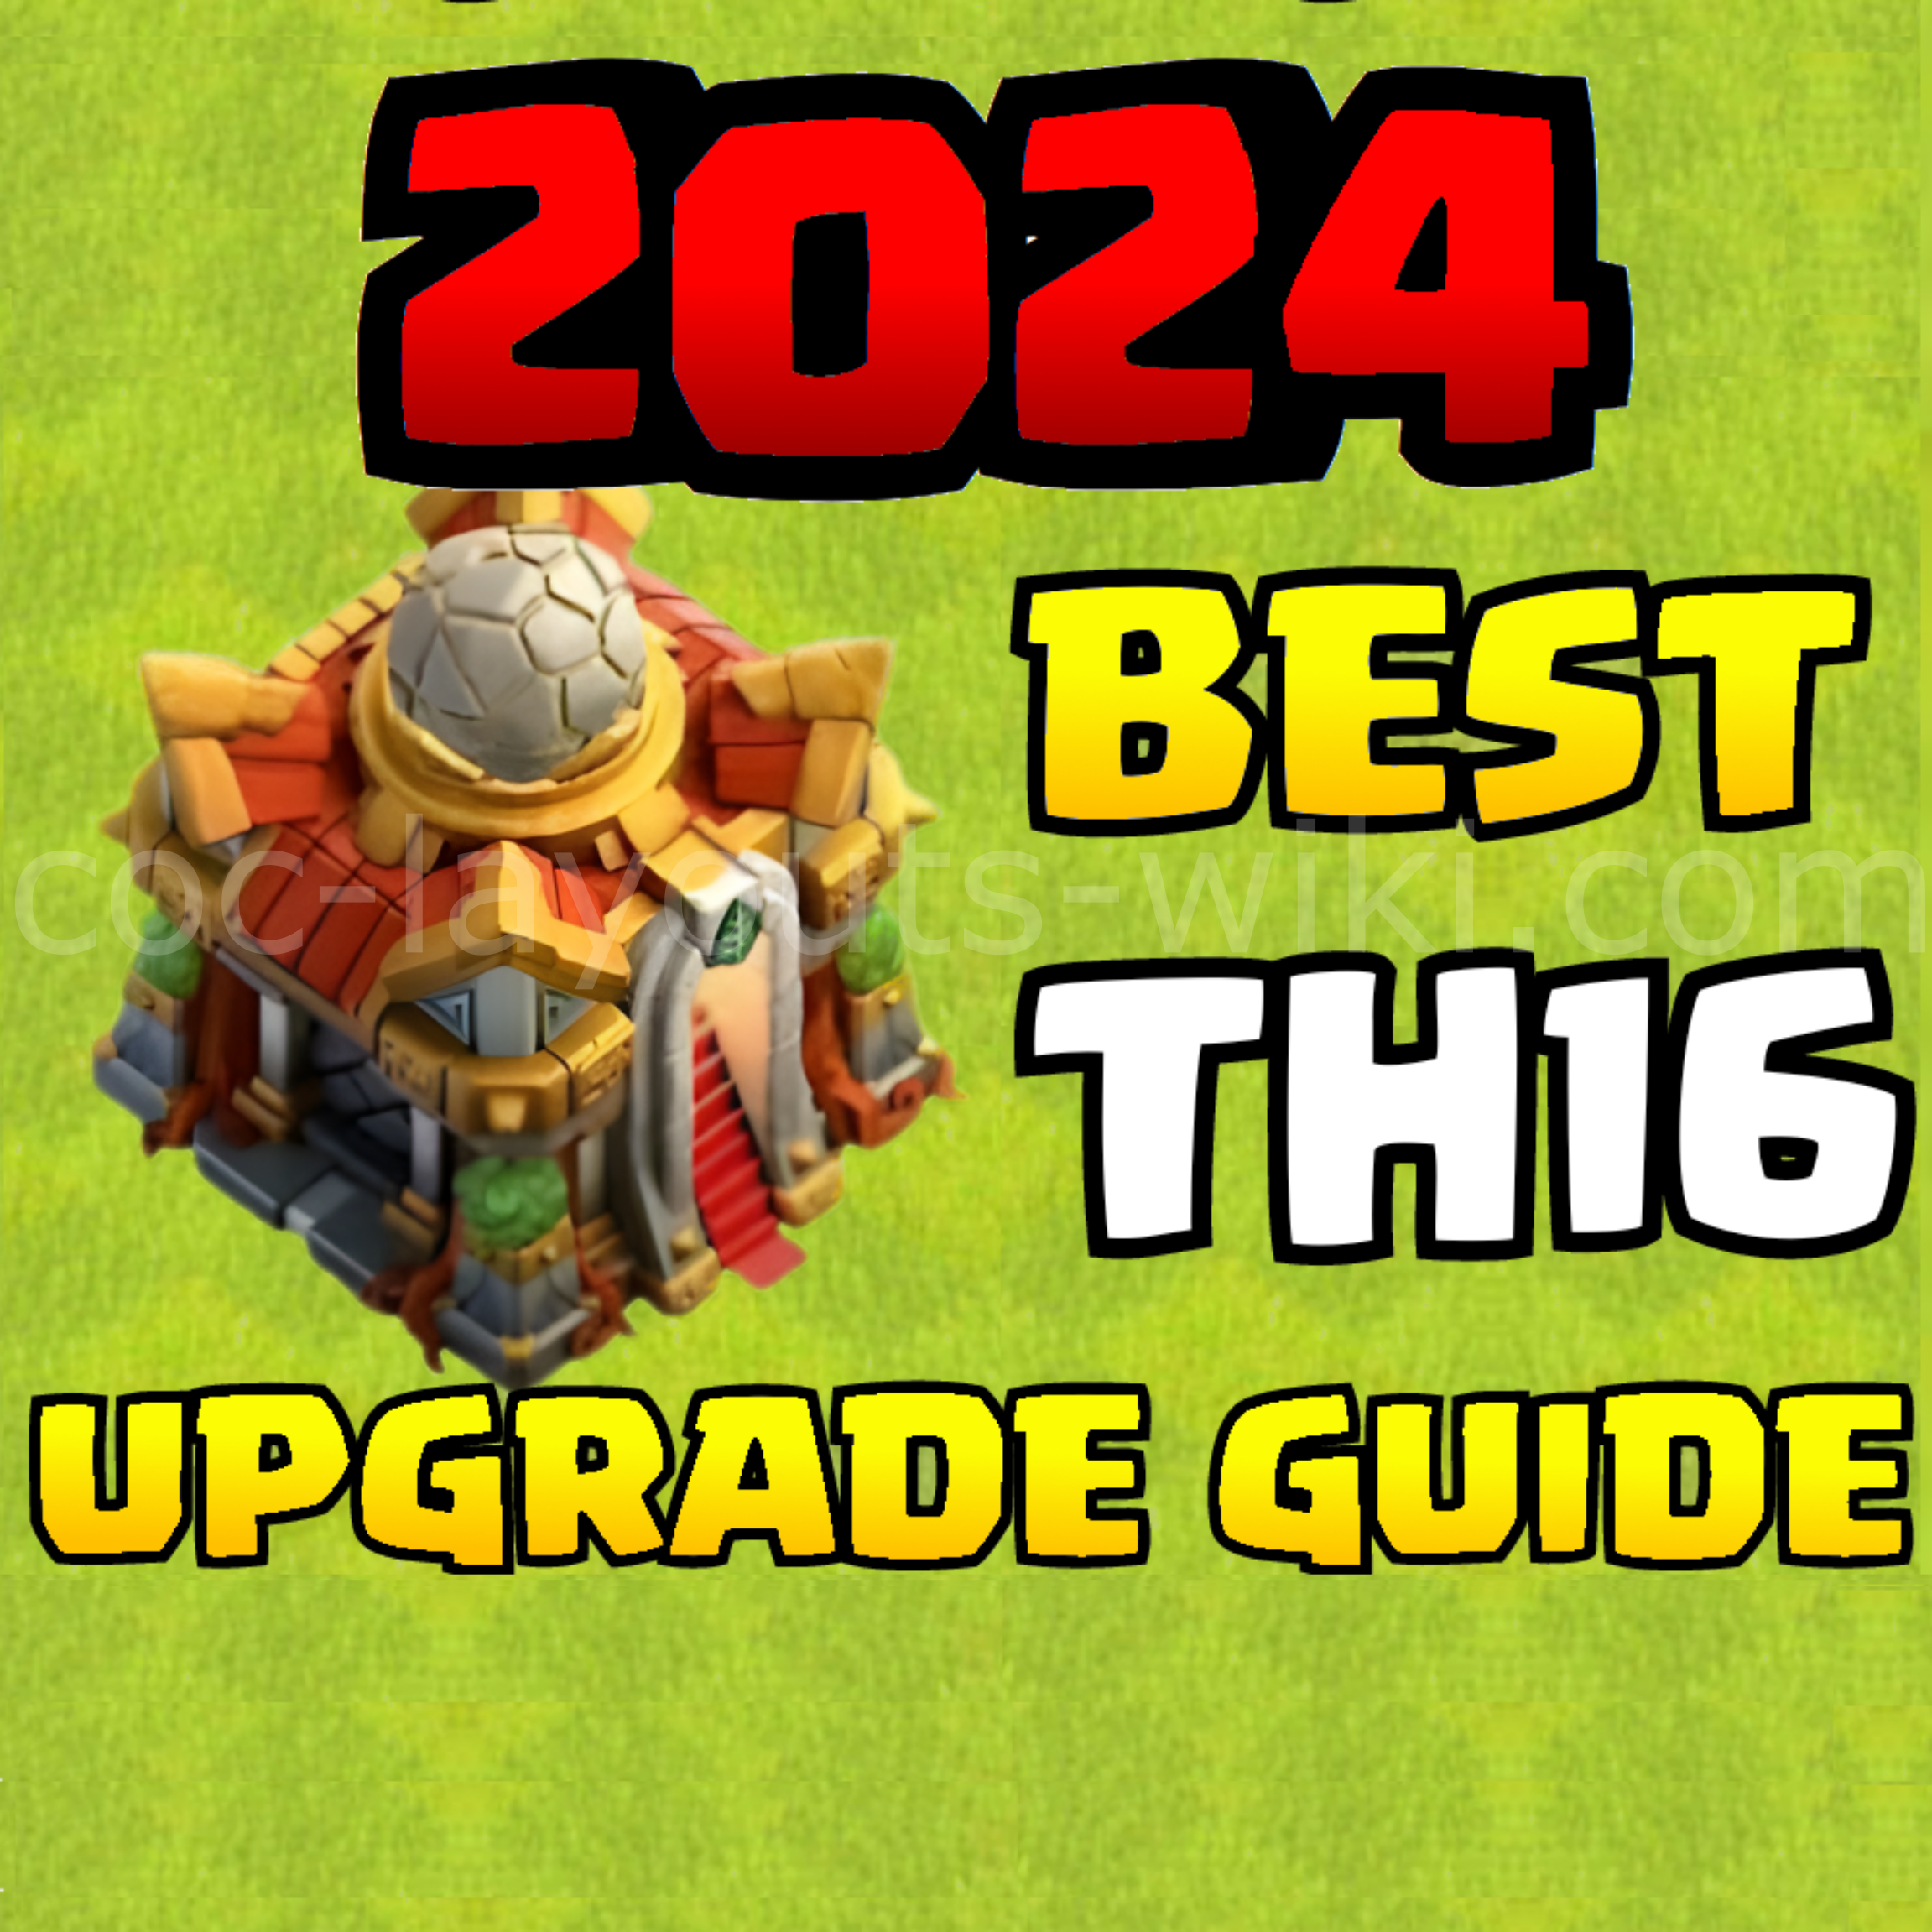 The Ultimate TH16 Upgrade Guide for Clash of Clans